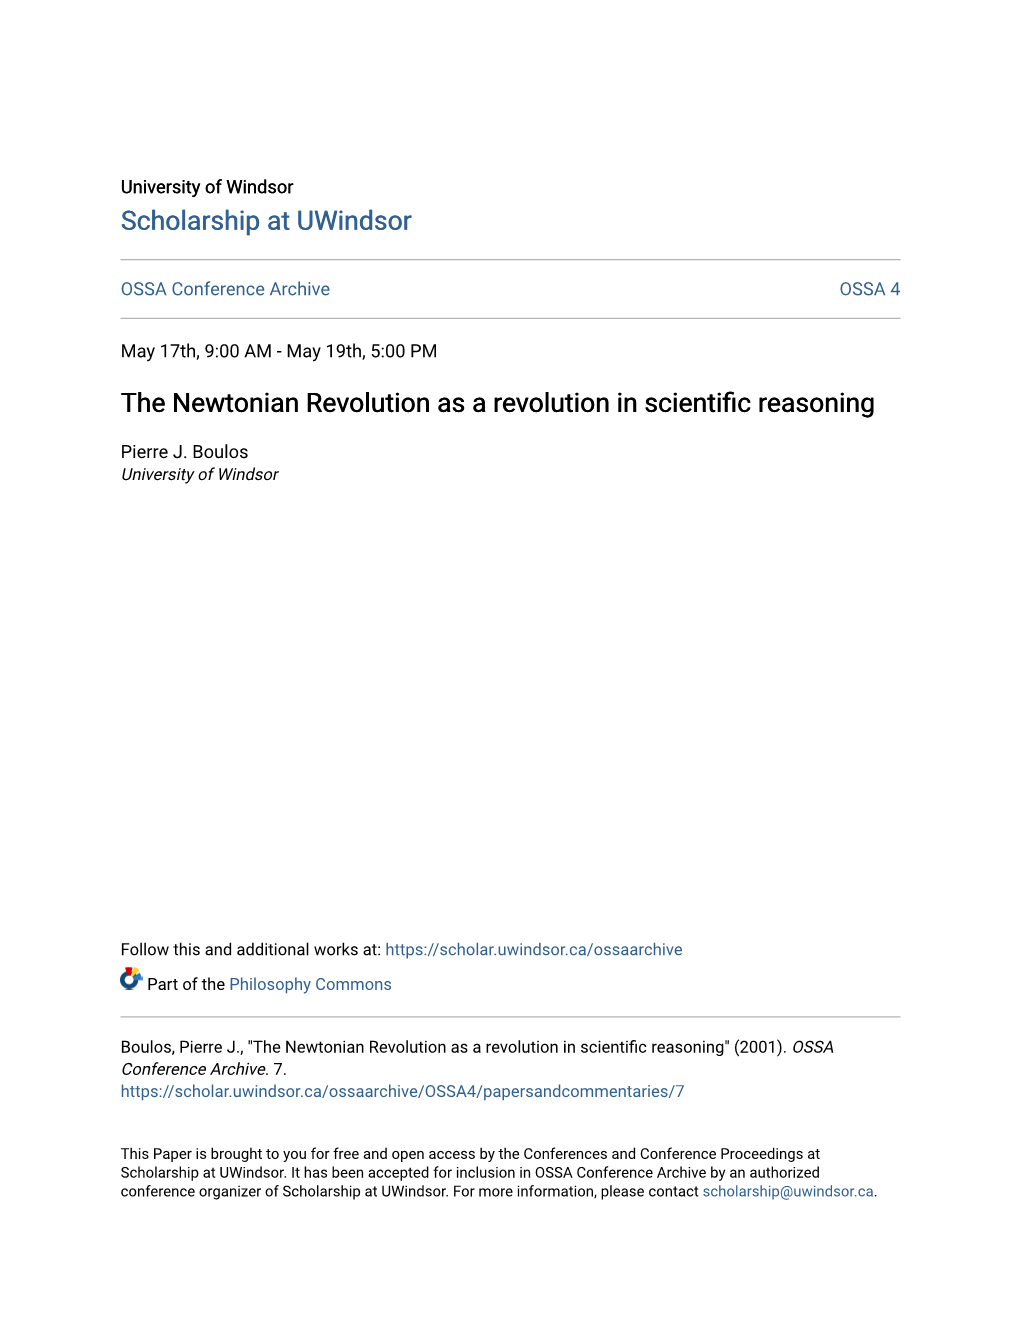 The Newtonian Revolution As a Revolution in Scientific Reasoning Author: Pierre J